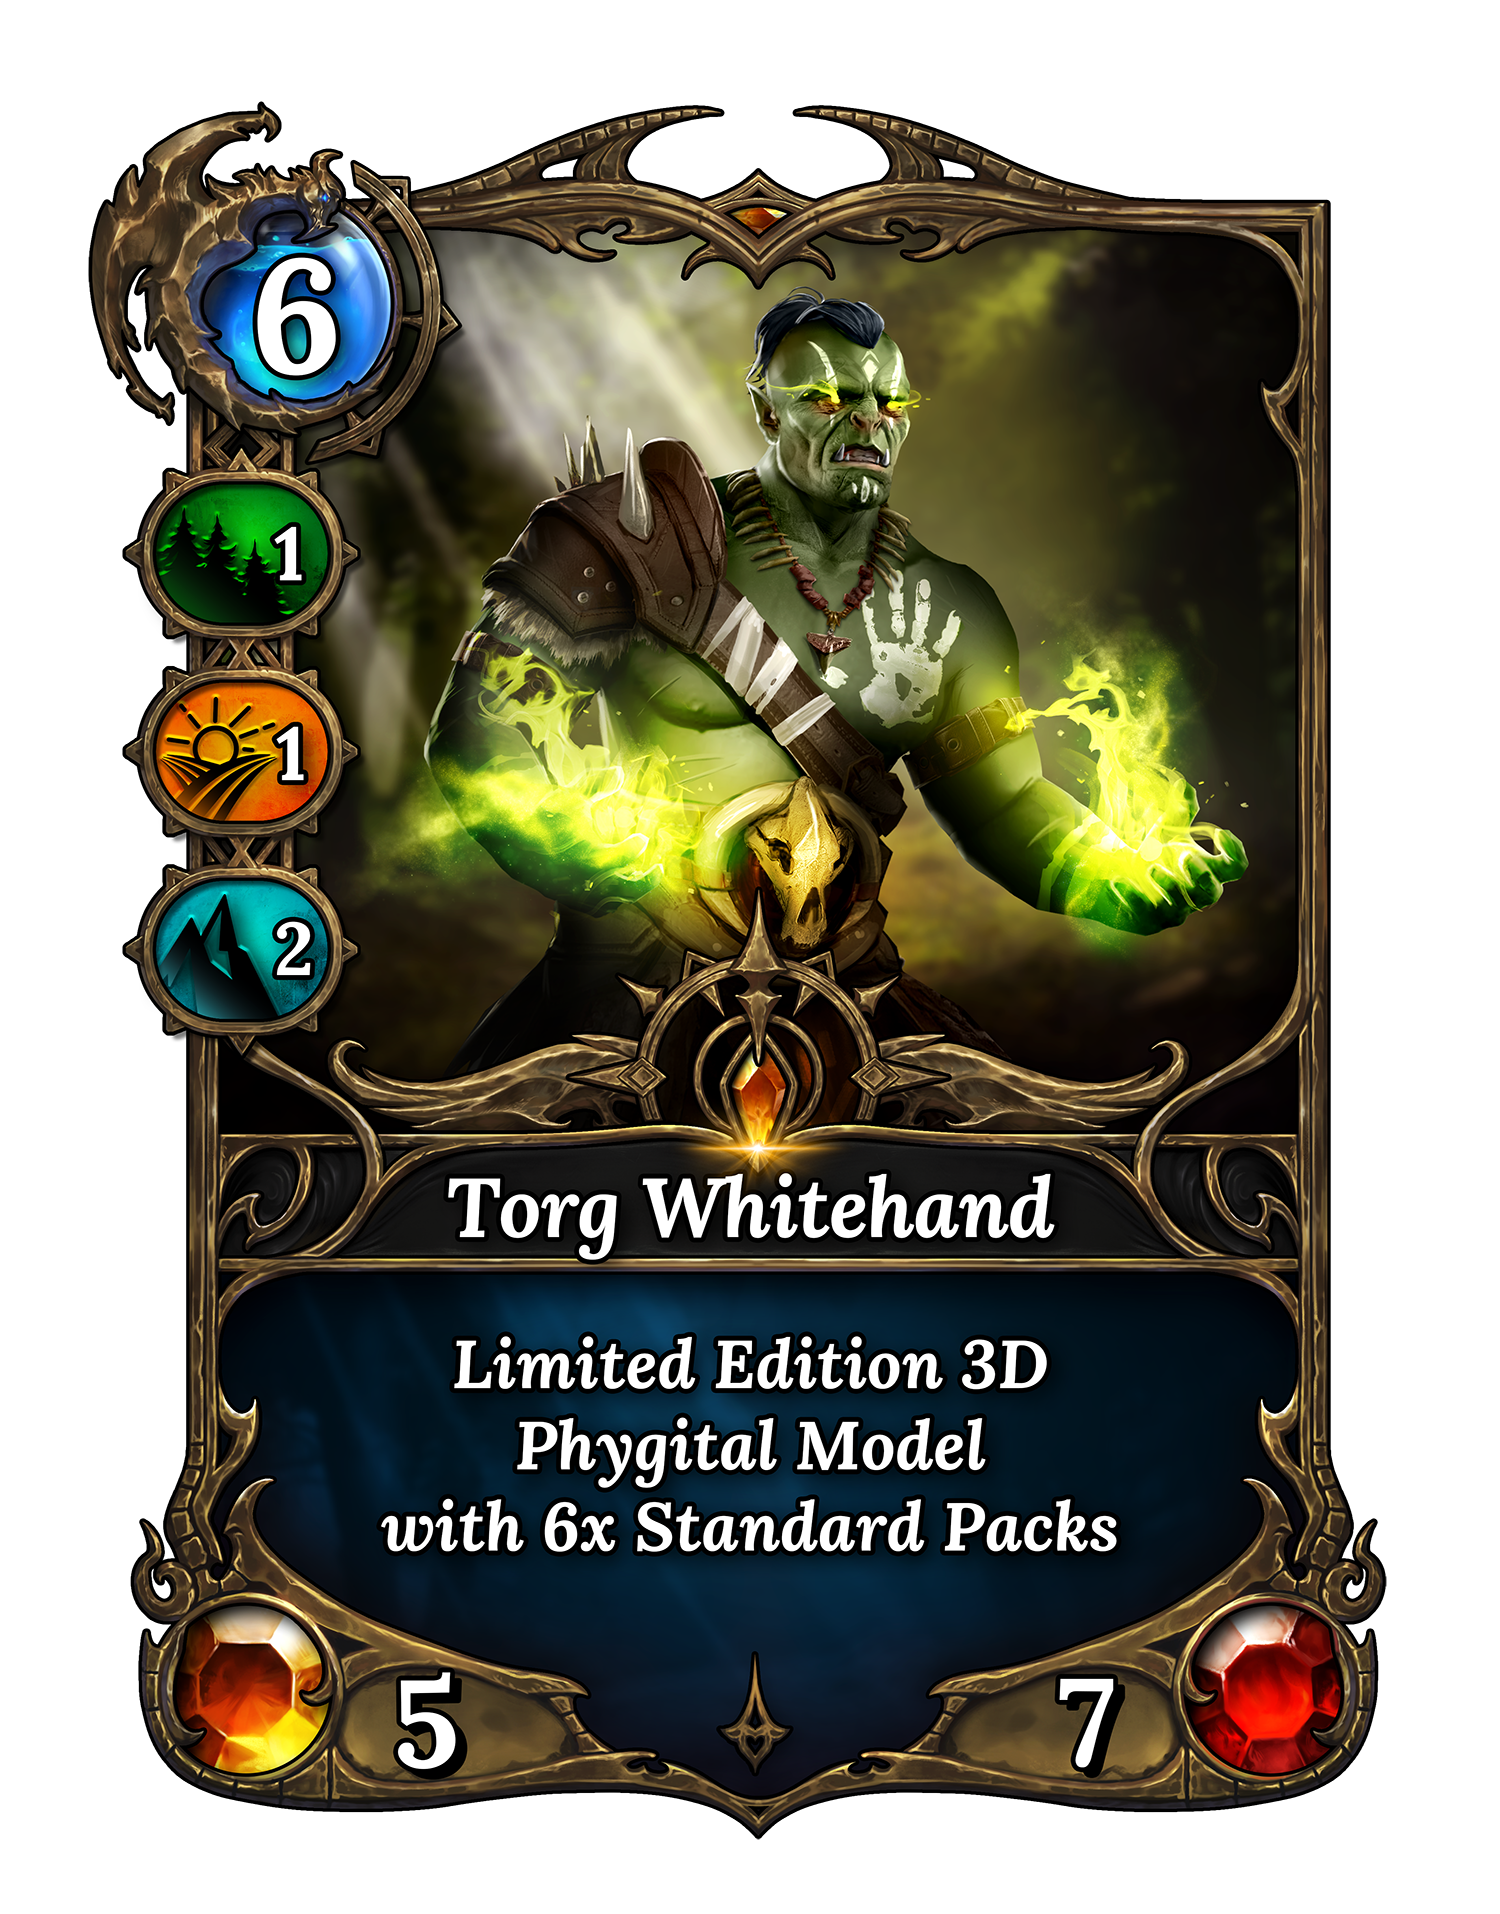 Torg Whitehand - Limited Genesis Collection of Legends of Elysium